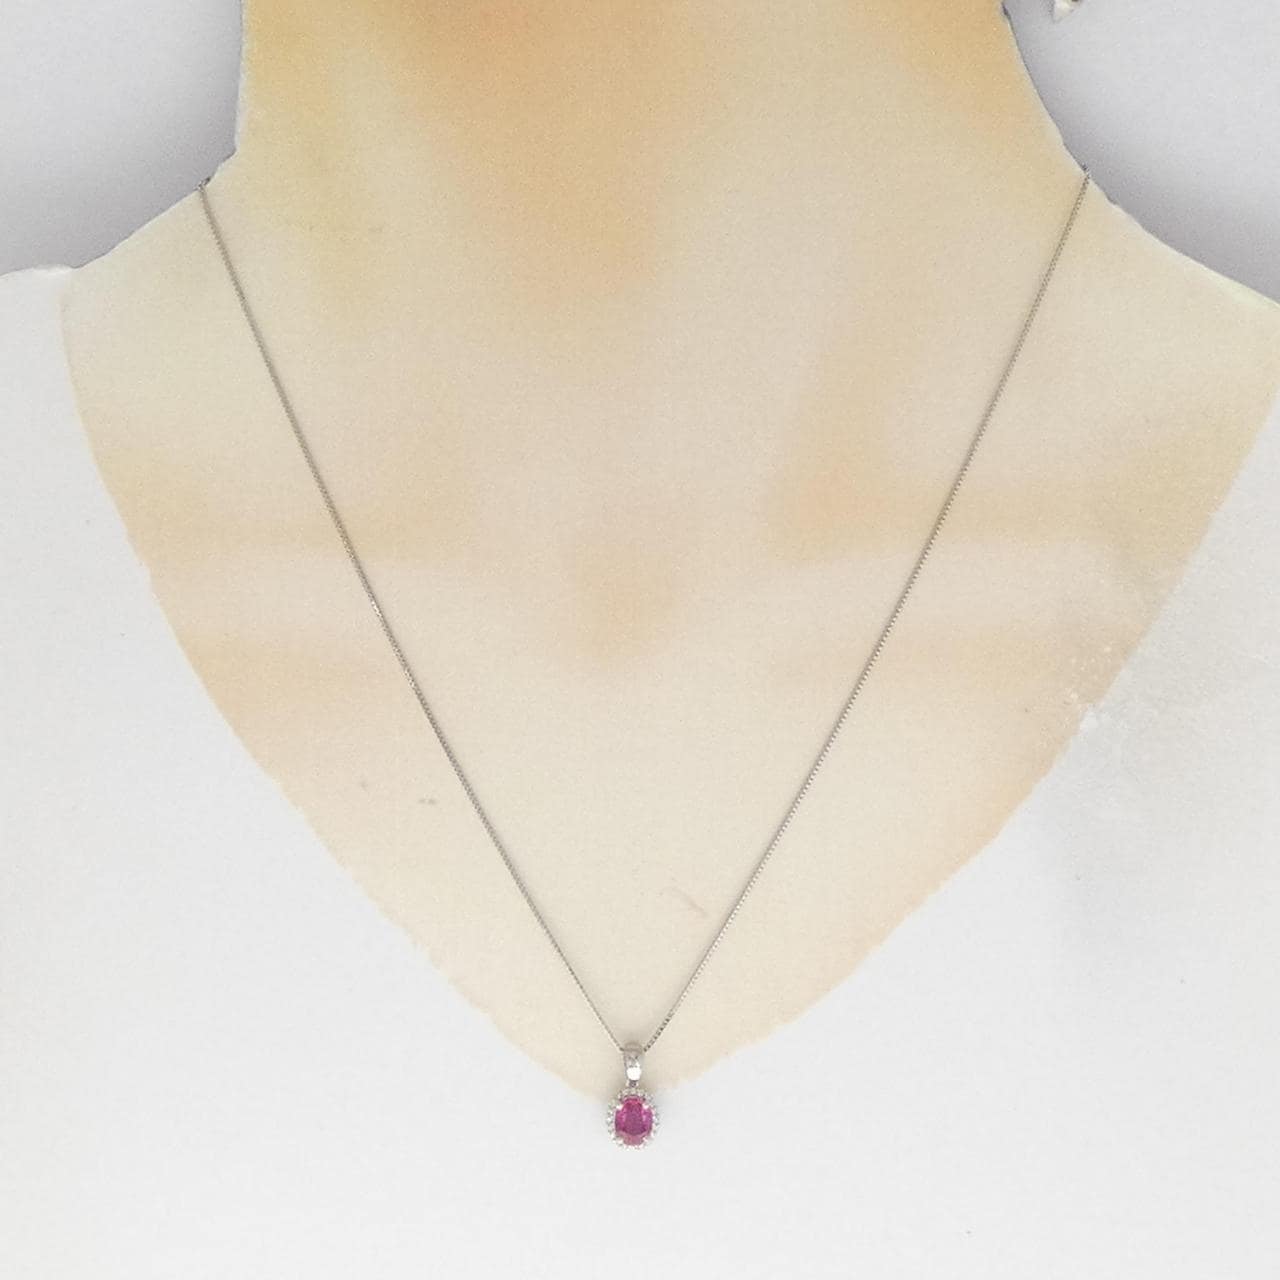 [Remake] PT Ruby Necklace 0.88CT Made in Thailand